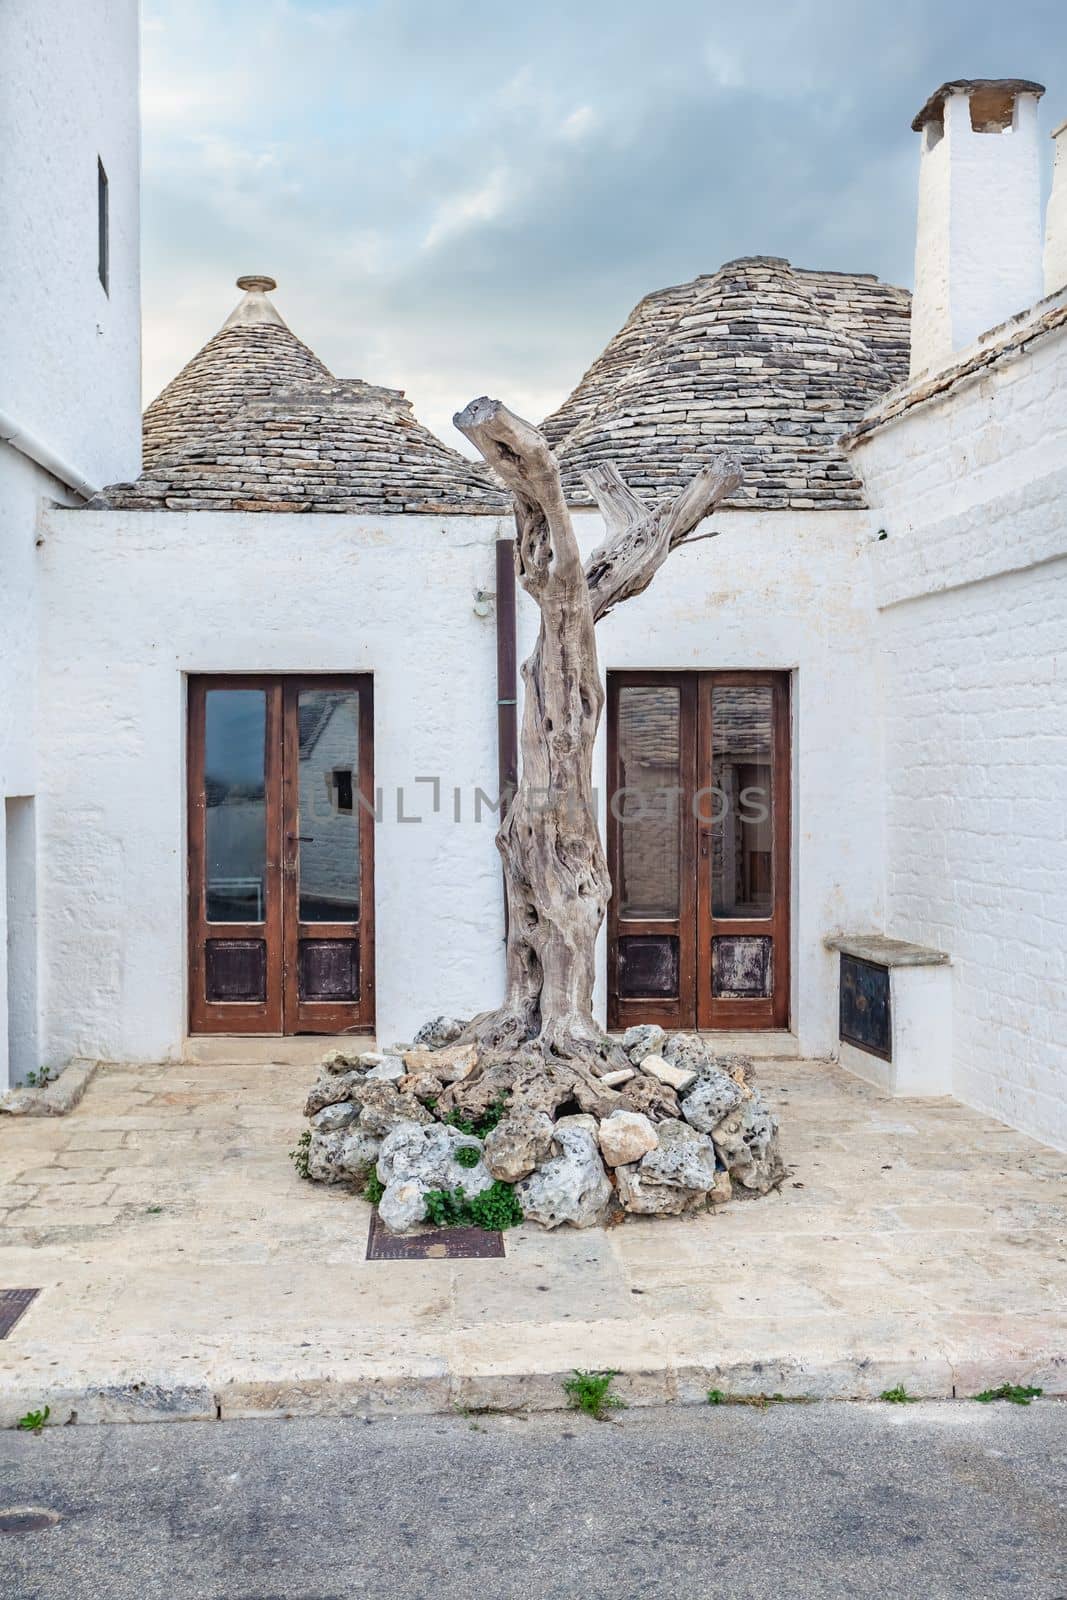 Alluring town of Alberobello with Trulli houses among green plants and flowers, main touristic district, Apulia region, Southern Italy. Typical buildings built with a dry stone walls and conical roofs.